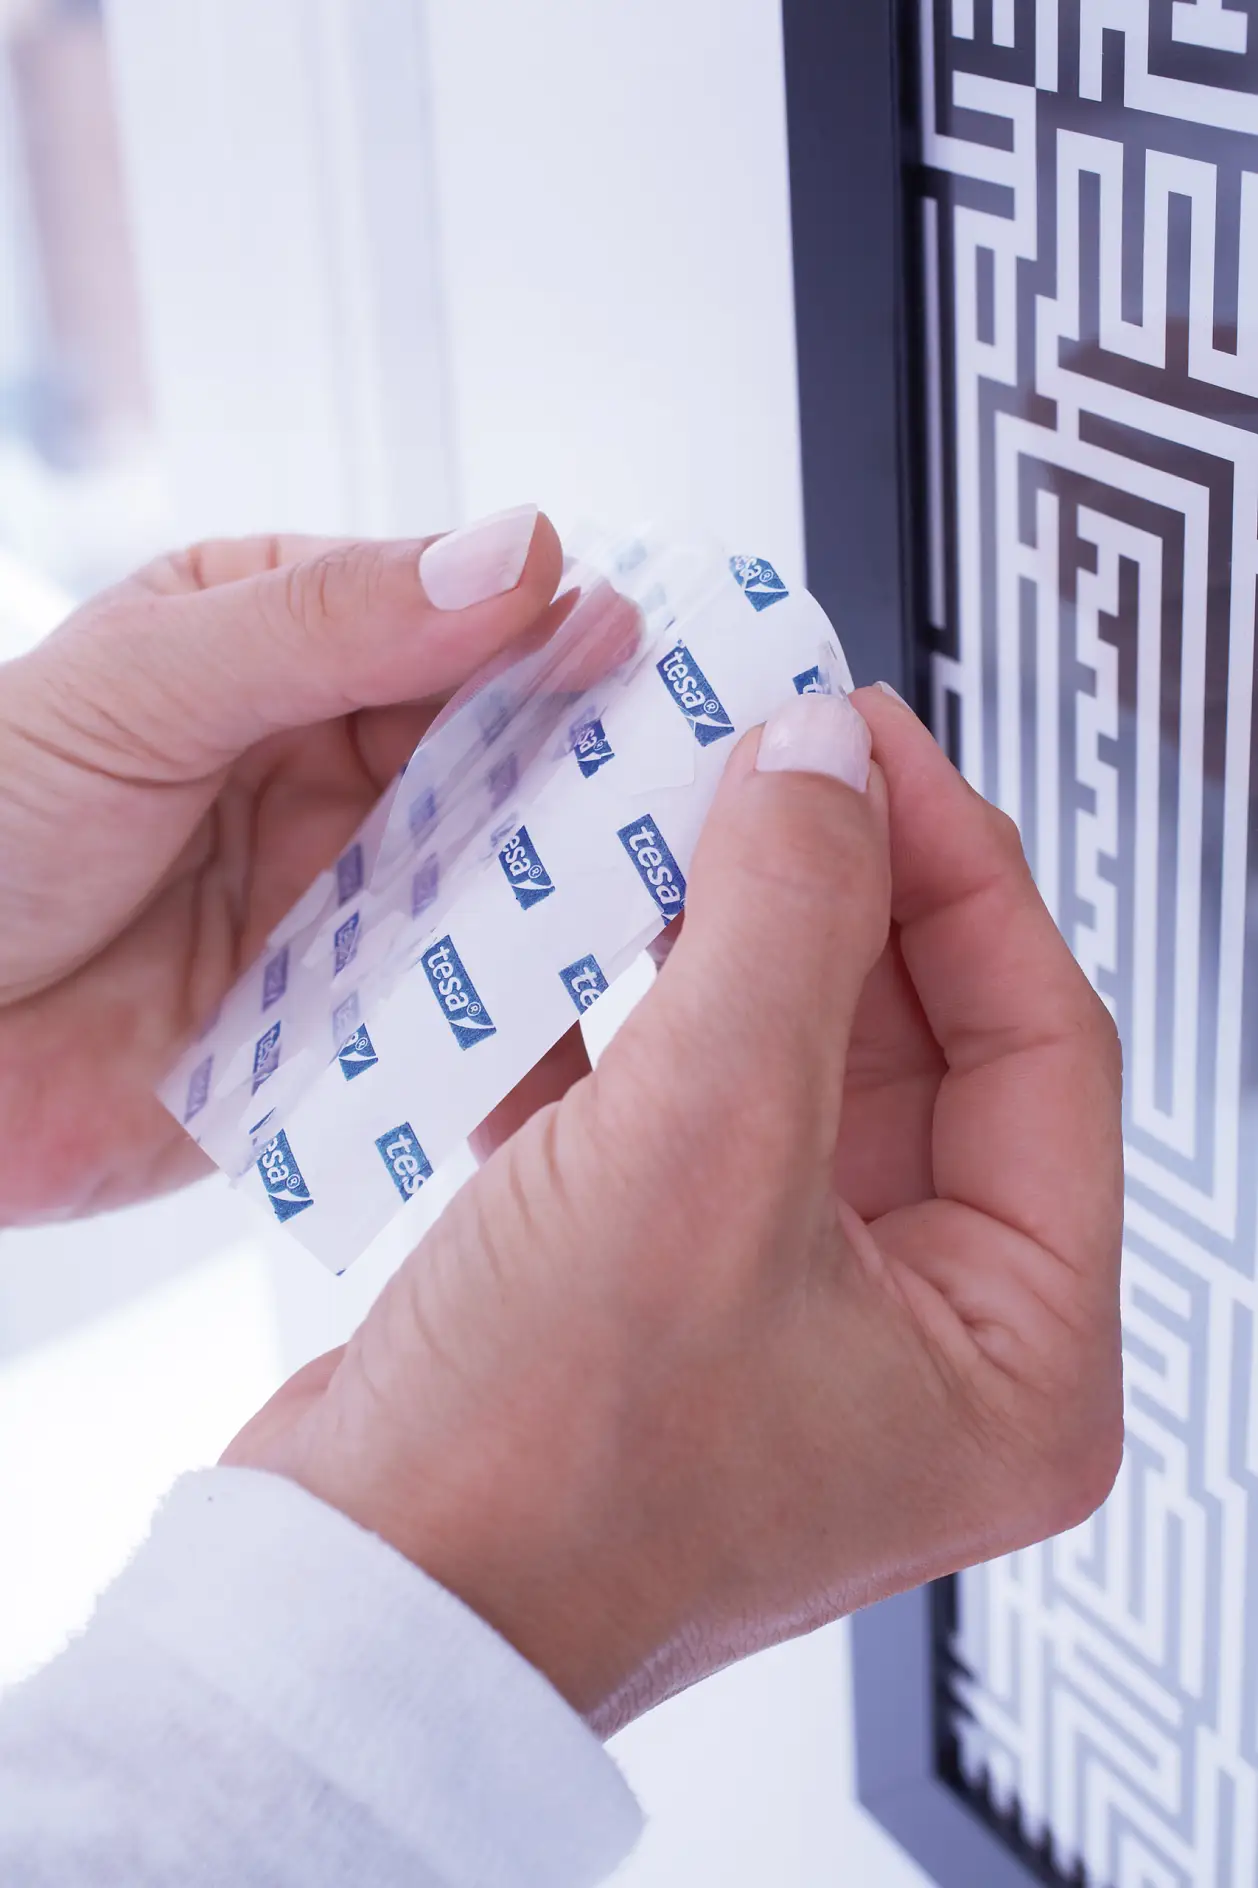 Hang-up the finished frames. Remove the protective foil from a tesa TACK® adhesive pad.